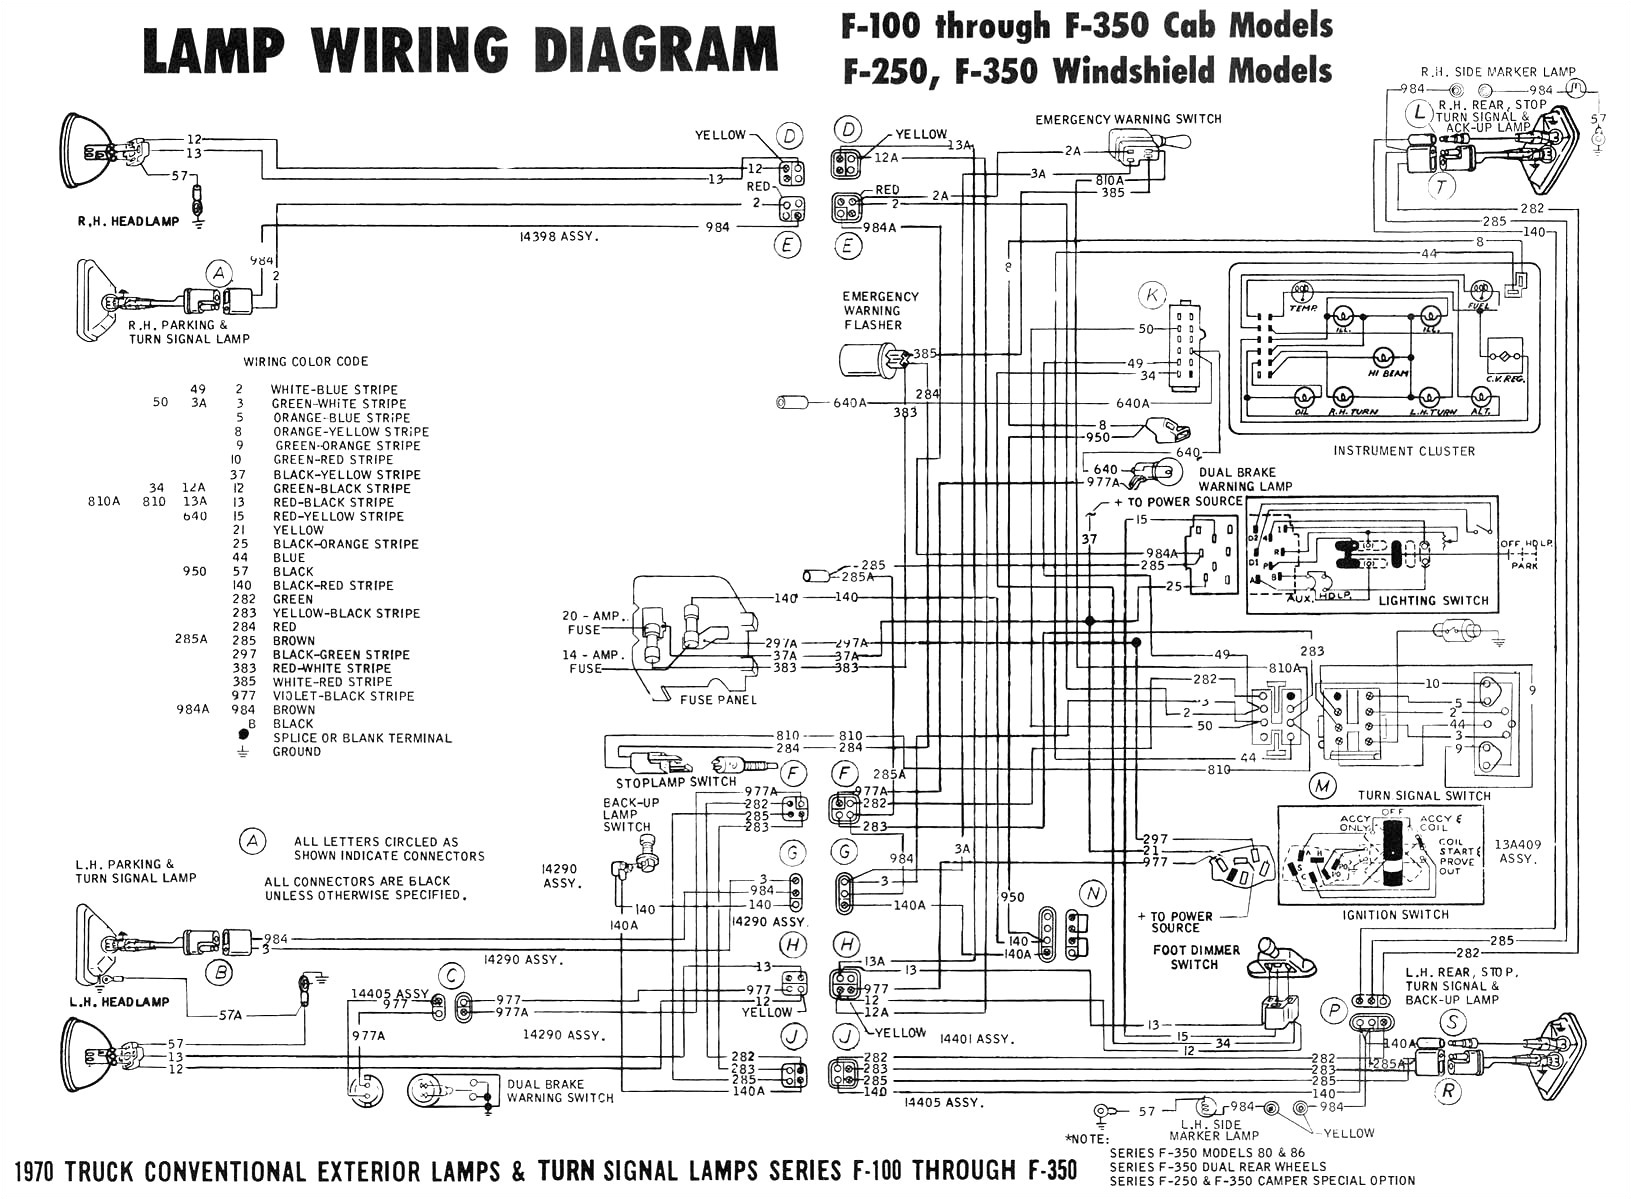 fuse diagram 1994 ford ranger autos post wiring diagram blog 1994 ford ranger engine diagrams autos